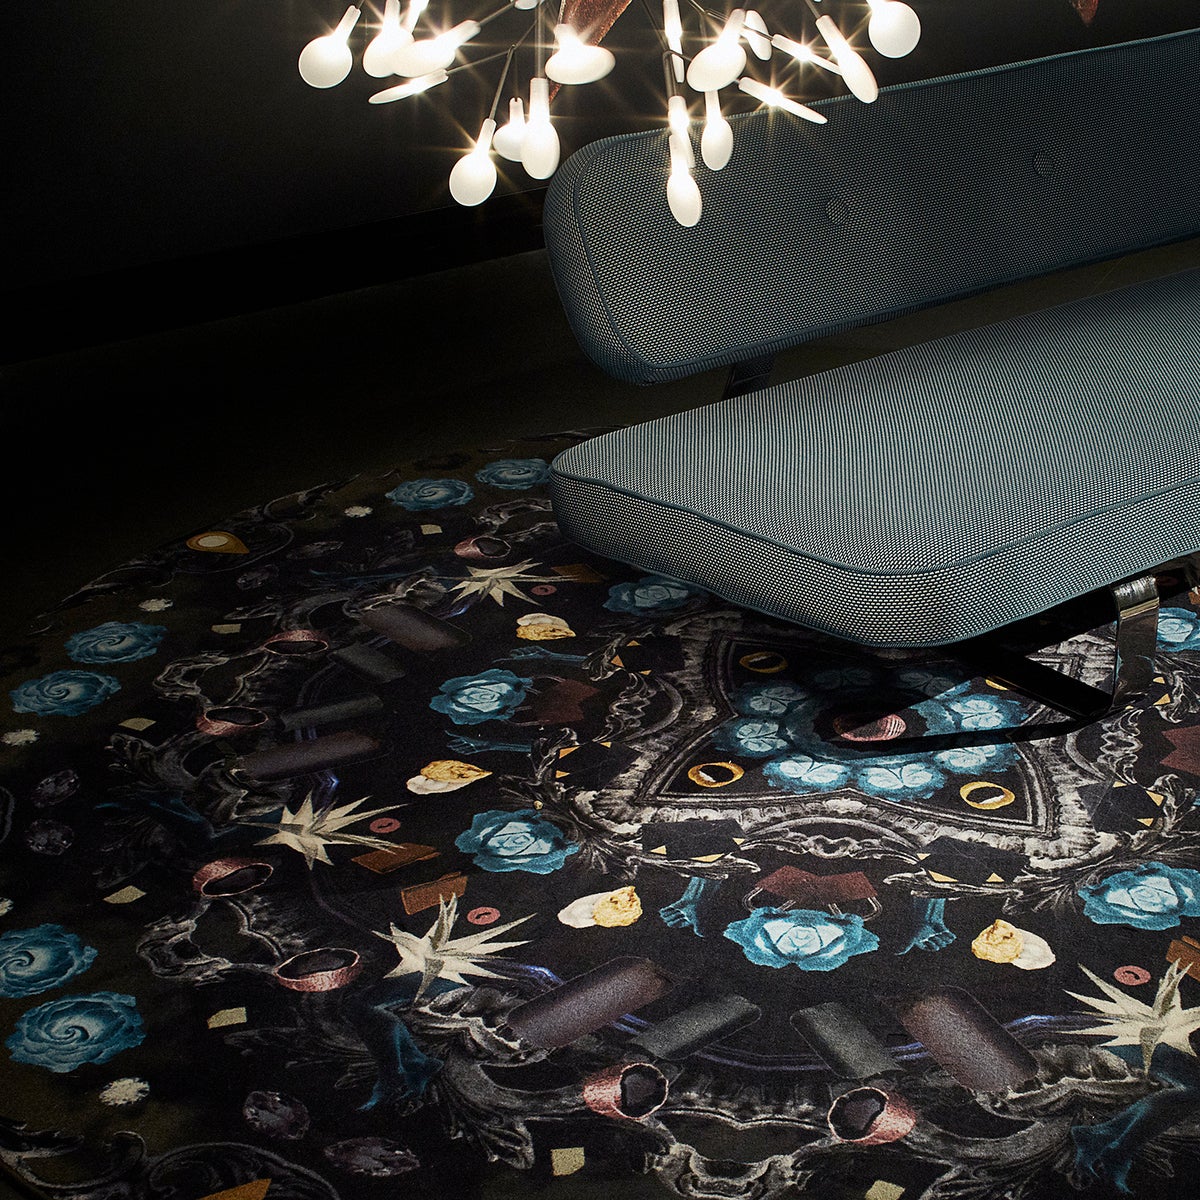 Upclose of dark and moody rug with fairy tale theme